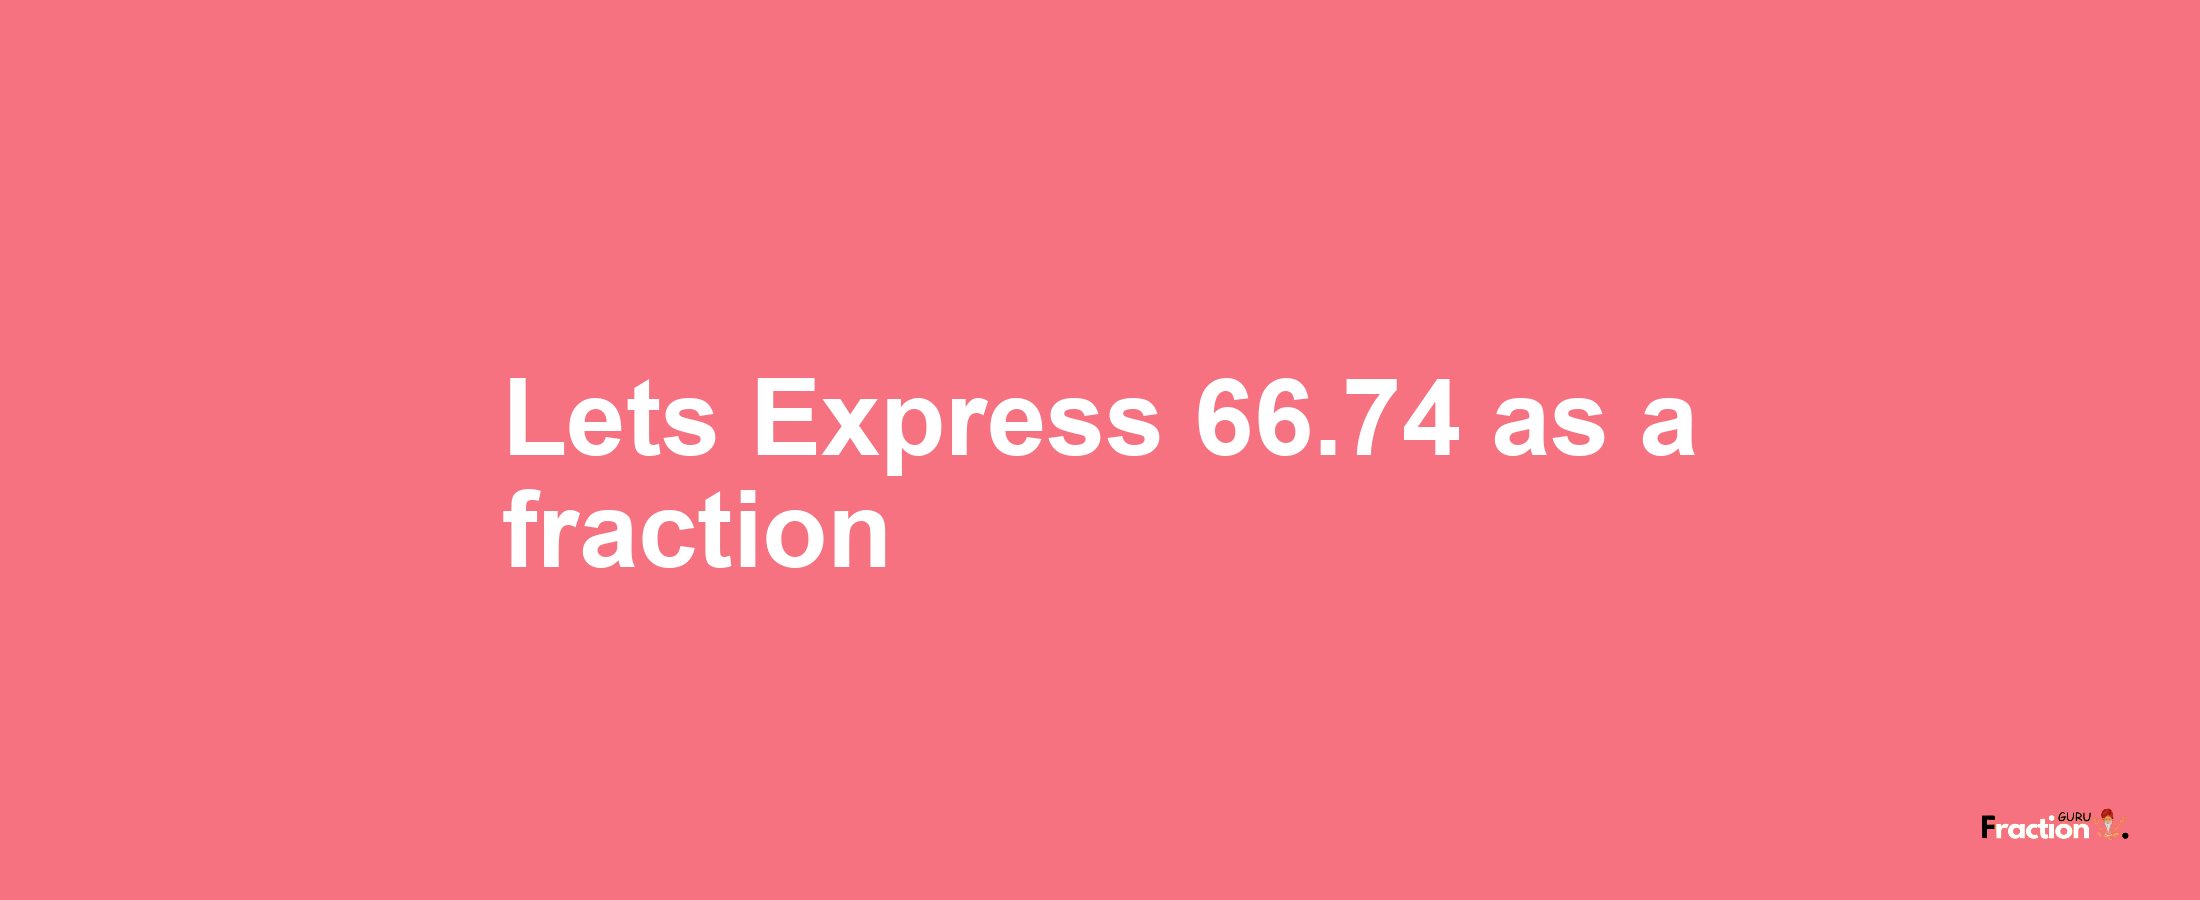 Lets Express 66.74 as afraction